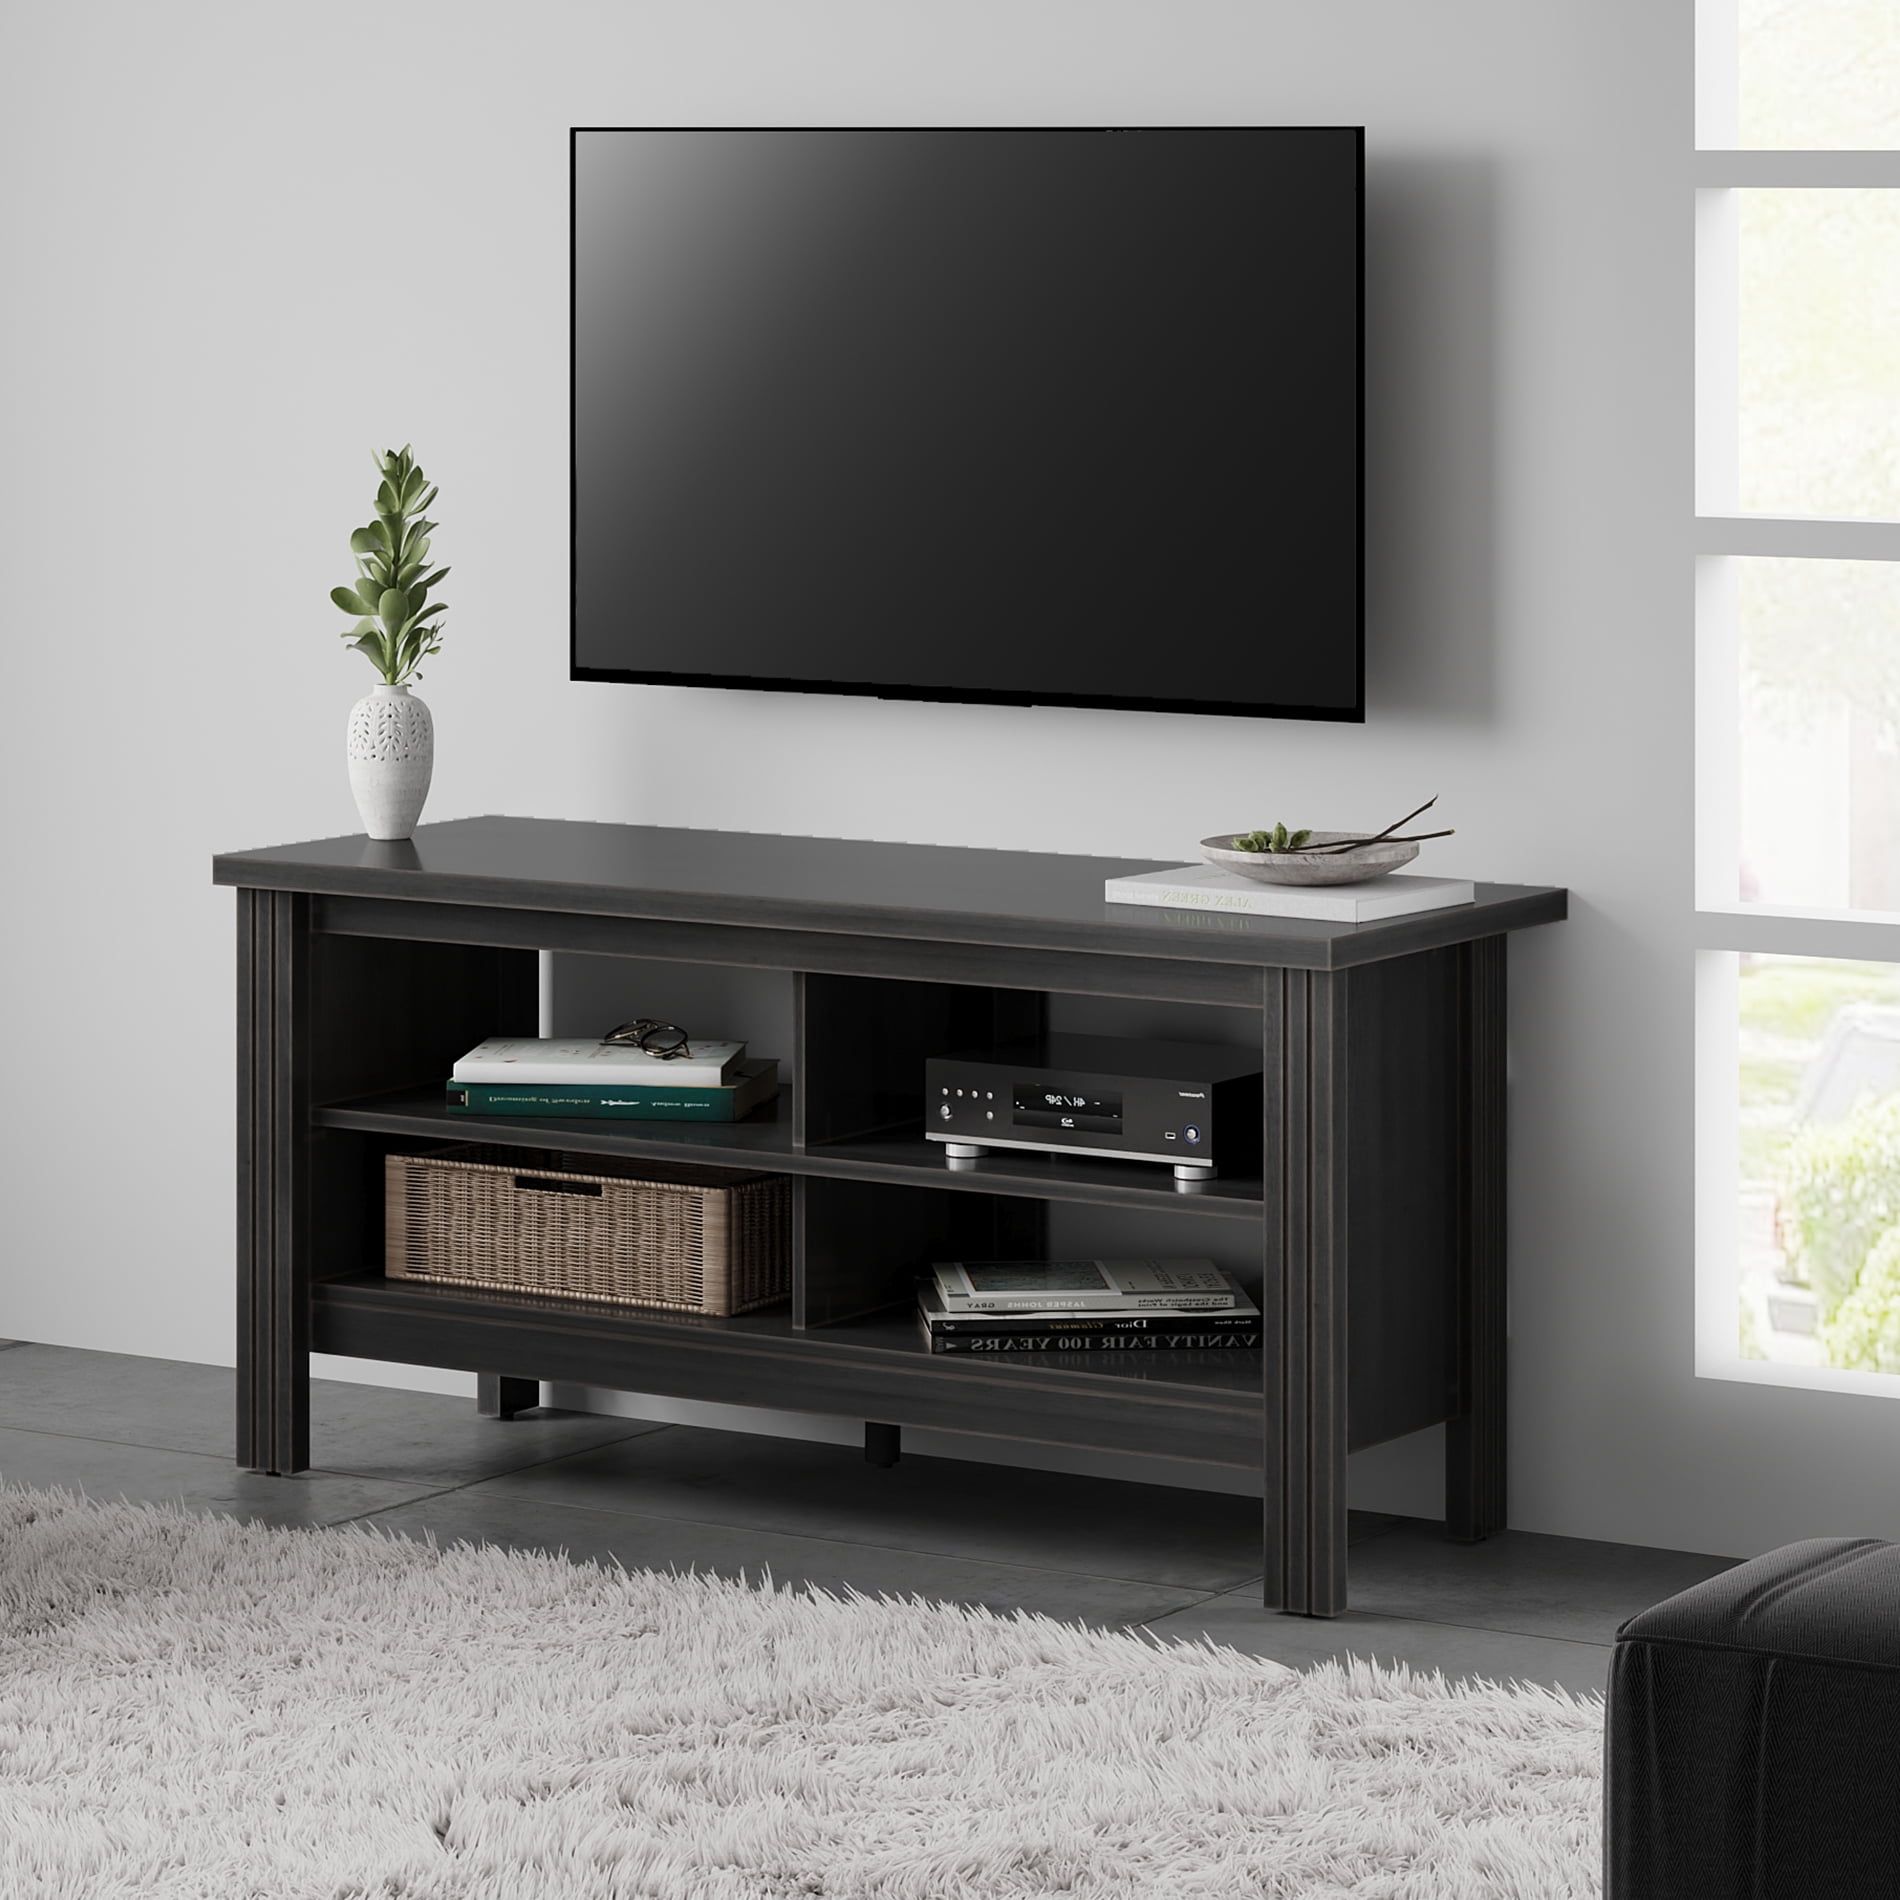 Farmhouse Wood Tv Stands For 55 Inch Flat Screen Media Console Storage Inside Media Entertainment Center Tv Stands (View 15 of 20)